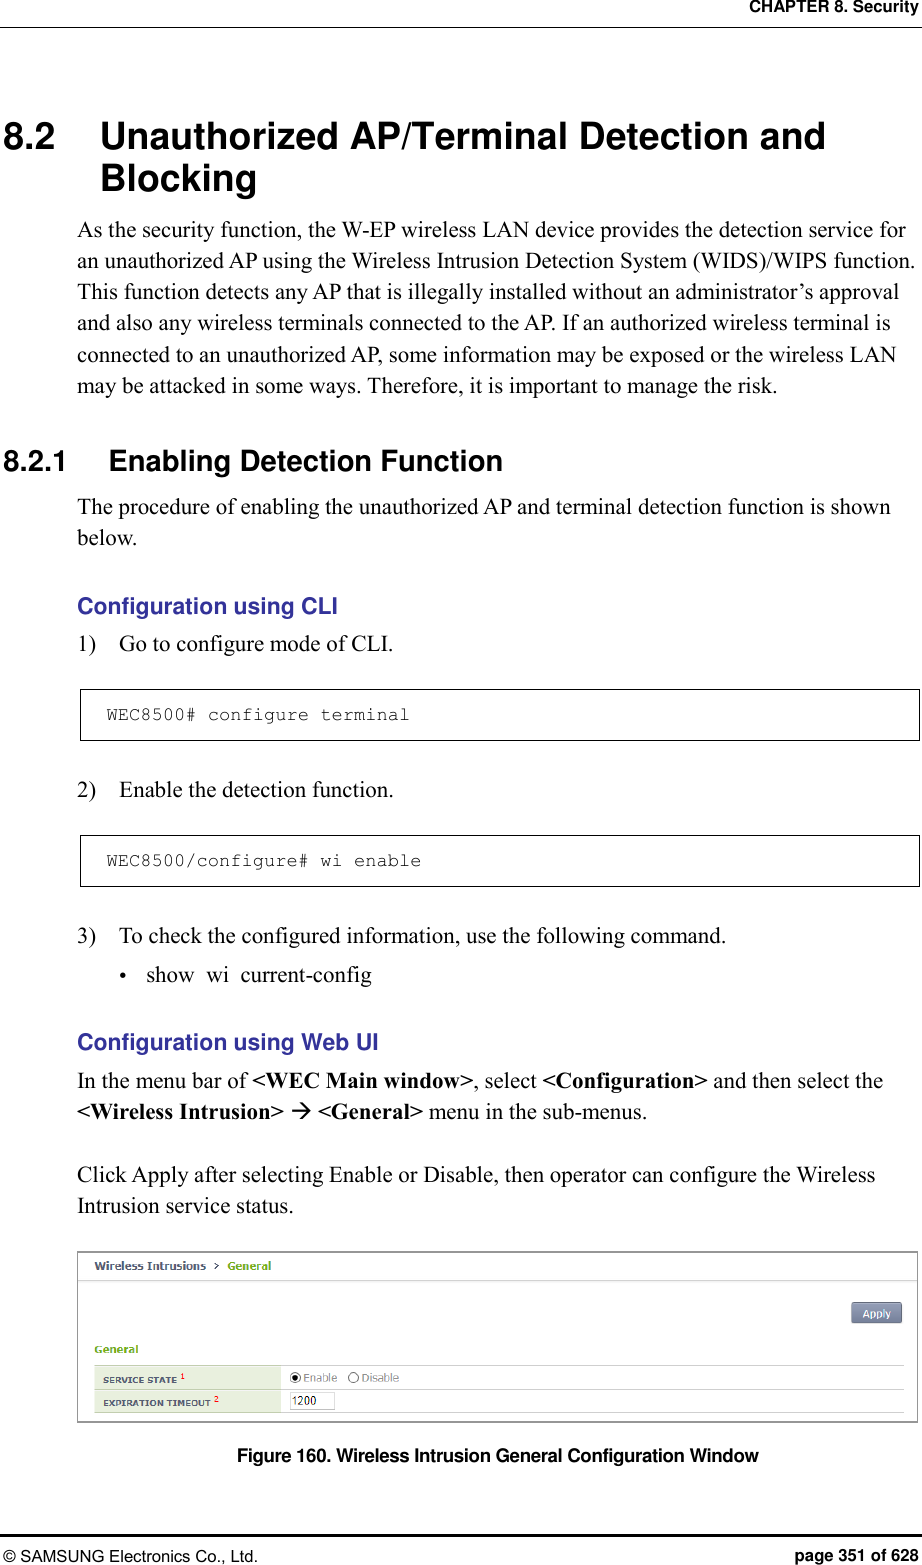 CHAPTER 8. Security © SAMSUNG Electronics Co., Ltd.  page 351 of 628 8.2  Unauthorized AP/Terminal Detection and Blocking As the security function, the W-EP wireless LAN device provides the detection service for an unauthorized AP using the Wireless Intrusion Detection System (WIDS)/WIPS function.   This function detects any AP that is illegally installed without an administrator’s approval and also any wireless terminals connected to the AP. If an authorized wireless terminal is connected to an unauthorized AP, some information may be exposed or the wireless LAN may be attacked in some ways. Therefore, it is important to manage the risk.  8.2.1  Enabling Detection Function The procedure of enabling the unauthorized AP and terminal detection function is shown below.  Configuration using CLI 1)    Go to configure mode of CLI.  WEC8500# configure terminal  2)    Enable the detection function.  WEC8500/configure# wi enable  3)    To check the configured information, use the following command.  show  wi  current-config  Configuration using Web UI In the menu bar of &lt;WEC Main window&gt;, select &lt;Configuration&gt; and then select the &lt;Wireless Intrusion&gt;  &lt;General&gt; menu in the sub-menus.  Click Apply after selecting Enable or Disable, then operator can configure the Wireless Intrusion service status.    Figure 160. Wireless Intrusion General Configuration Window 